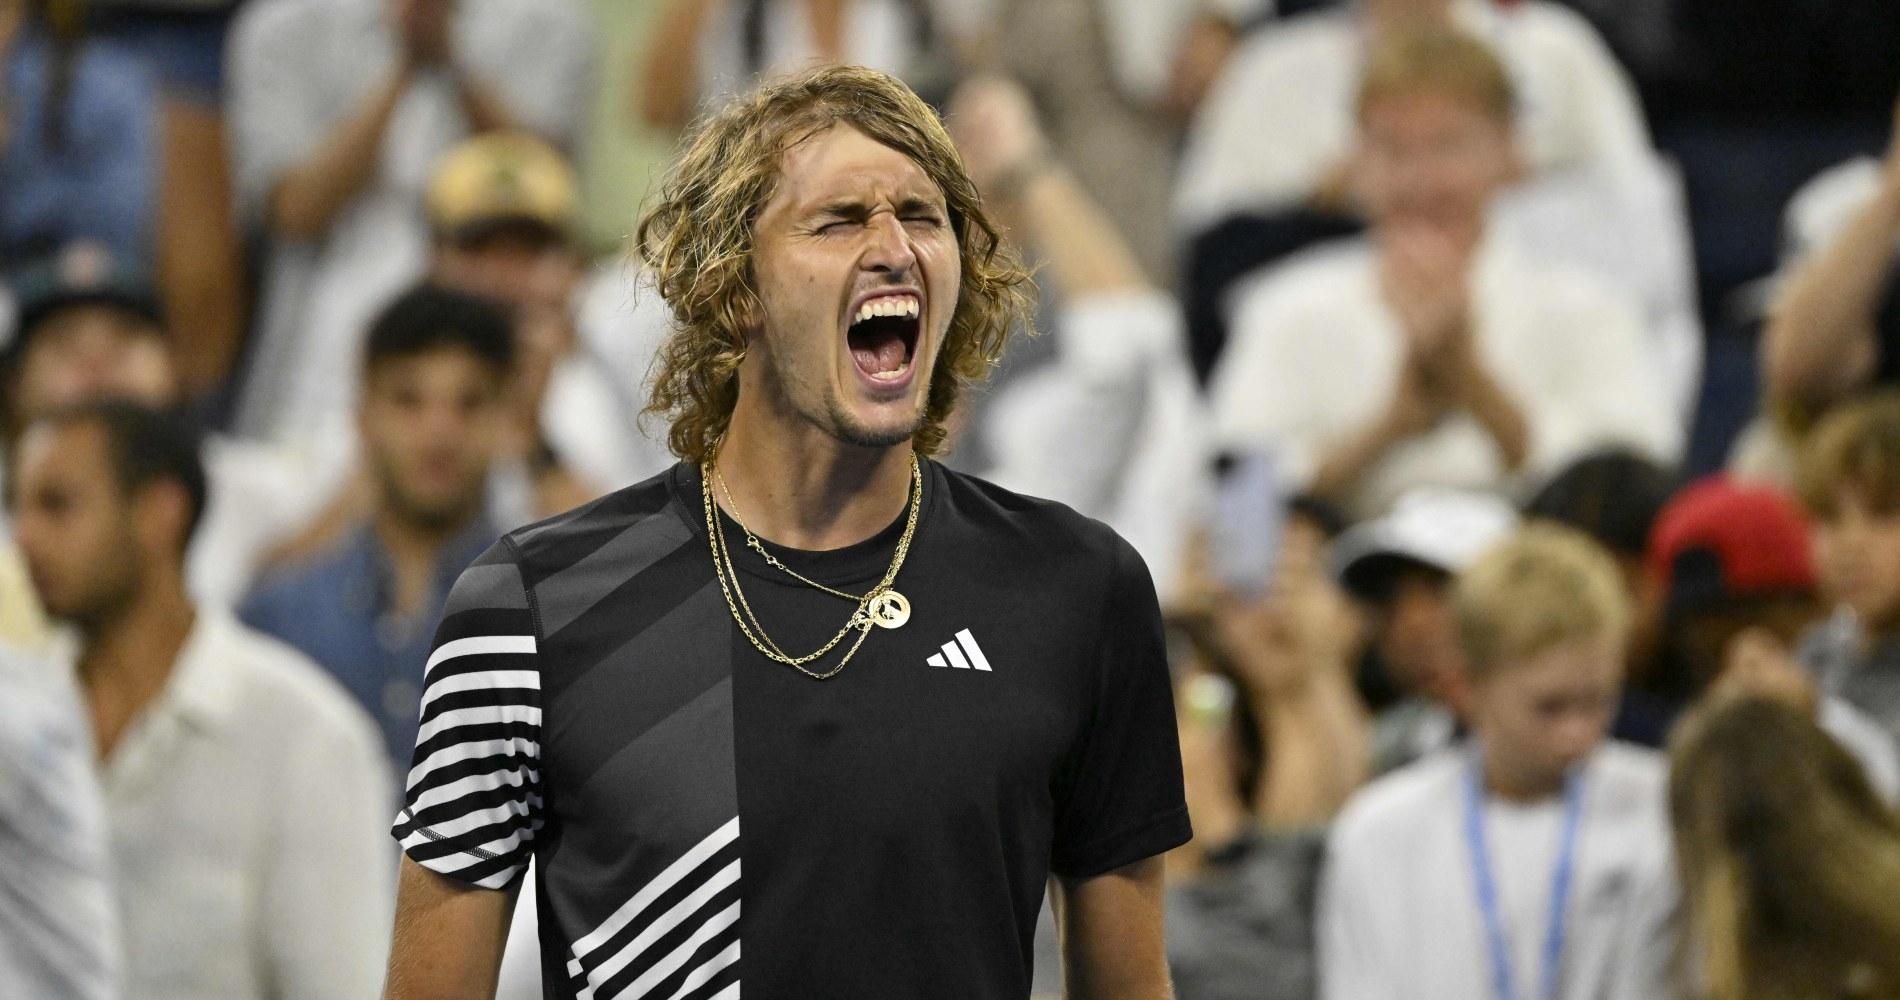 “This is what I live for” Zverev into quarter-finals